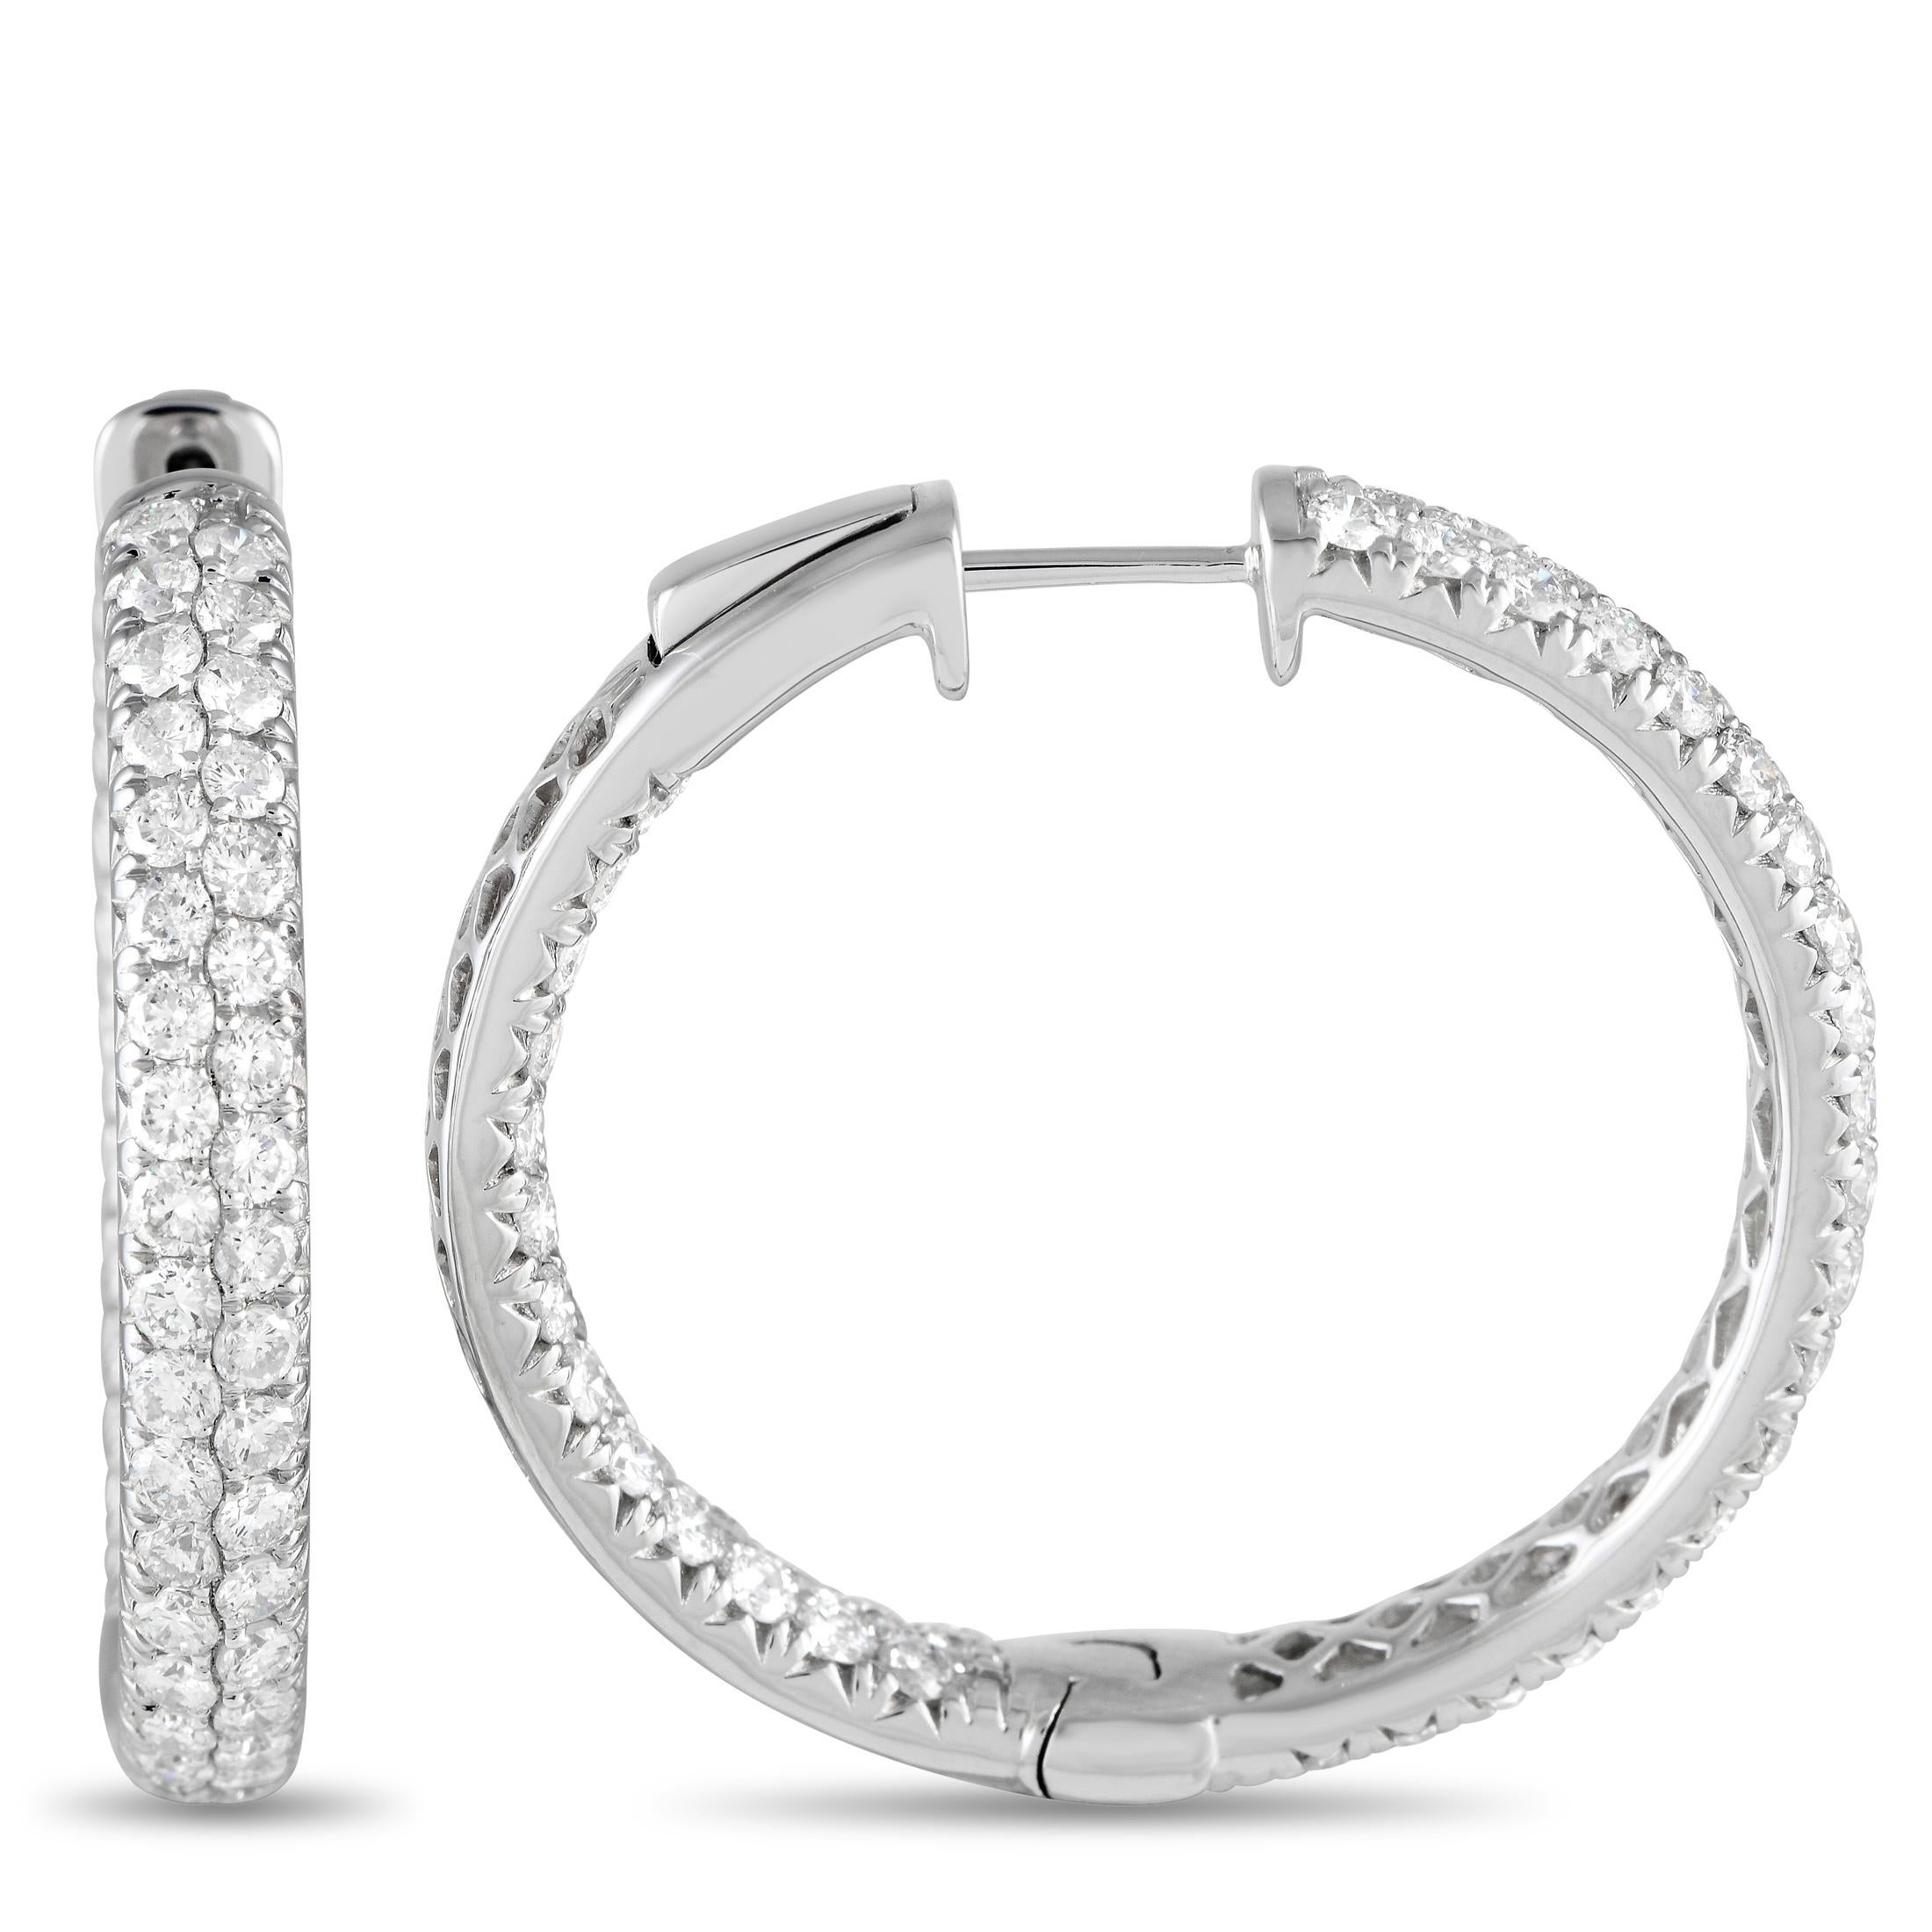 These hoops deliver tons of sparkle and style. Designed with an inside-out layout of diamonds, each hoop has its outer front and inner front-facing back lined with two rows of diamonds. These diamond hoops are sure to give your evening dress a